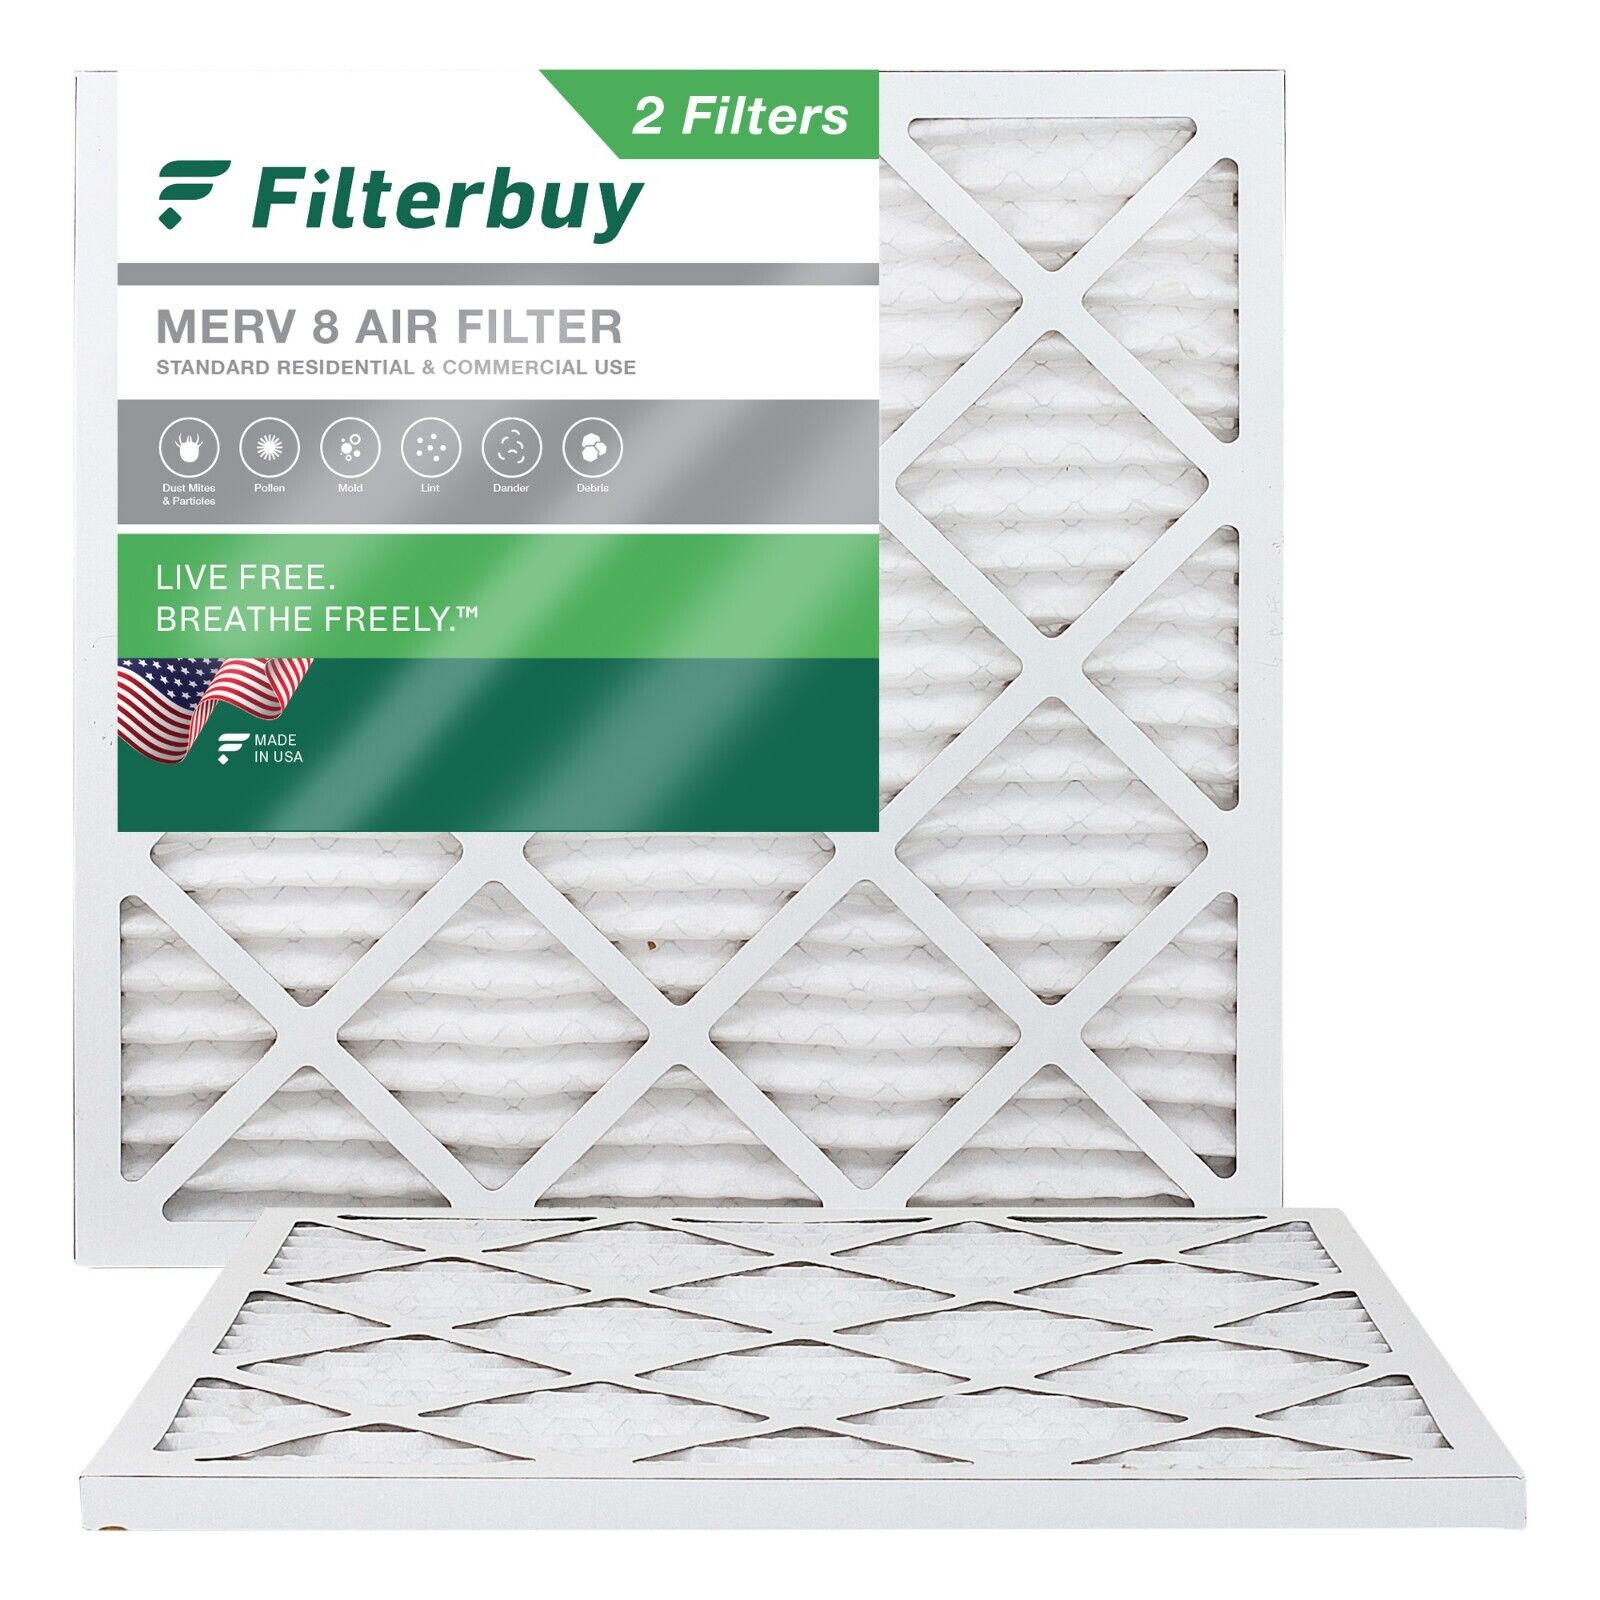 Filterbuy 20x20x1 Pleated Air Filters, Replacement for HVAC AC Furnace (MERV 8)